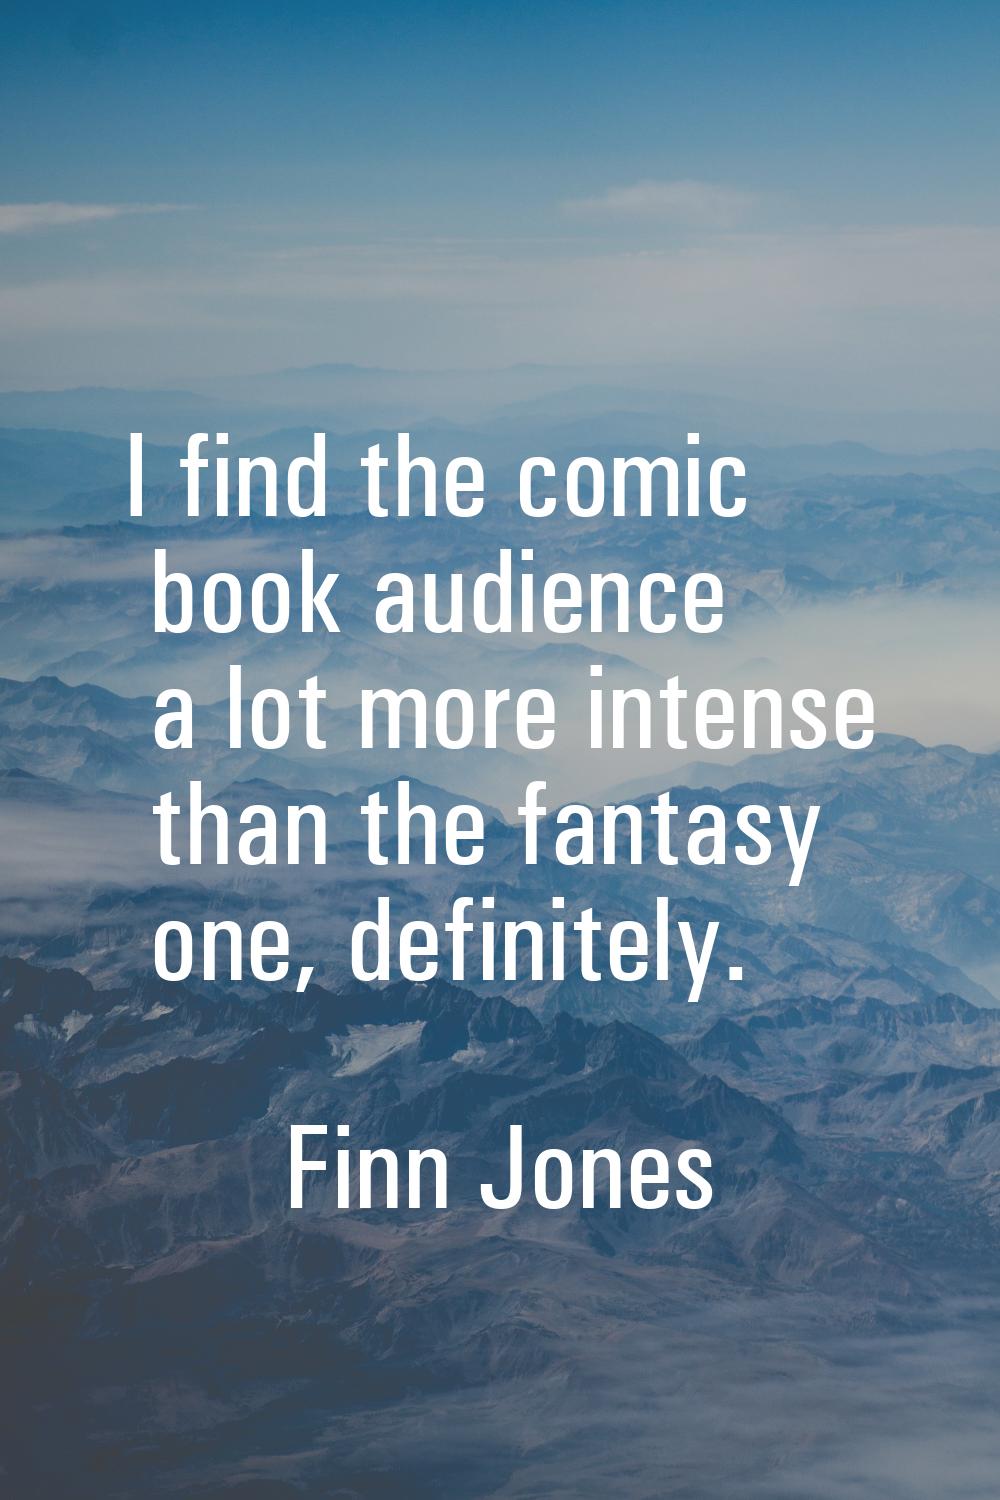 I find the comic book audience a lot more intense than the fantasy one, definitely.